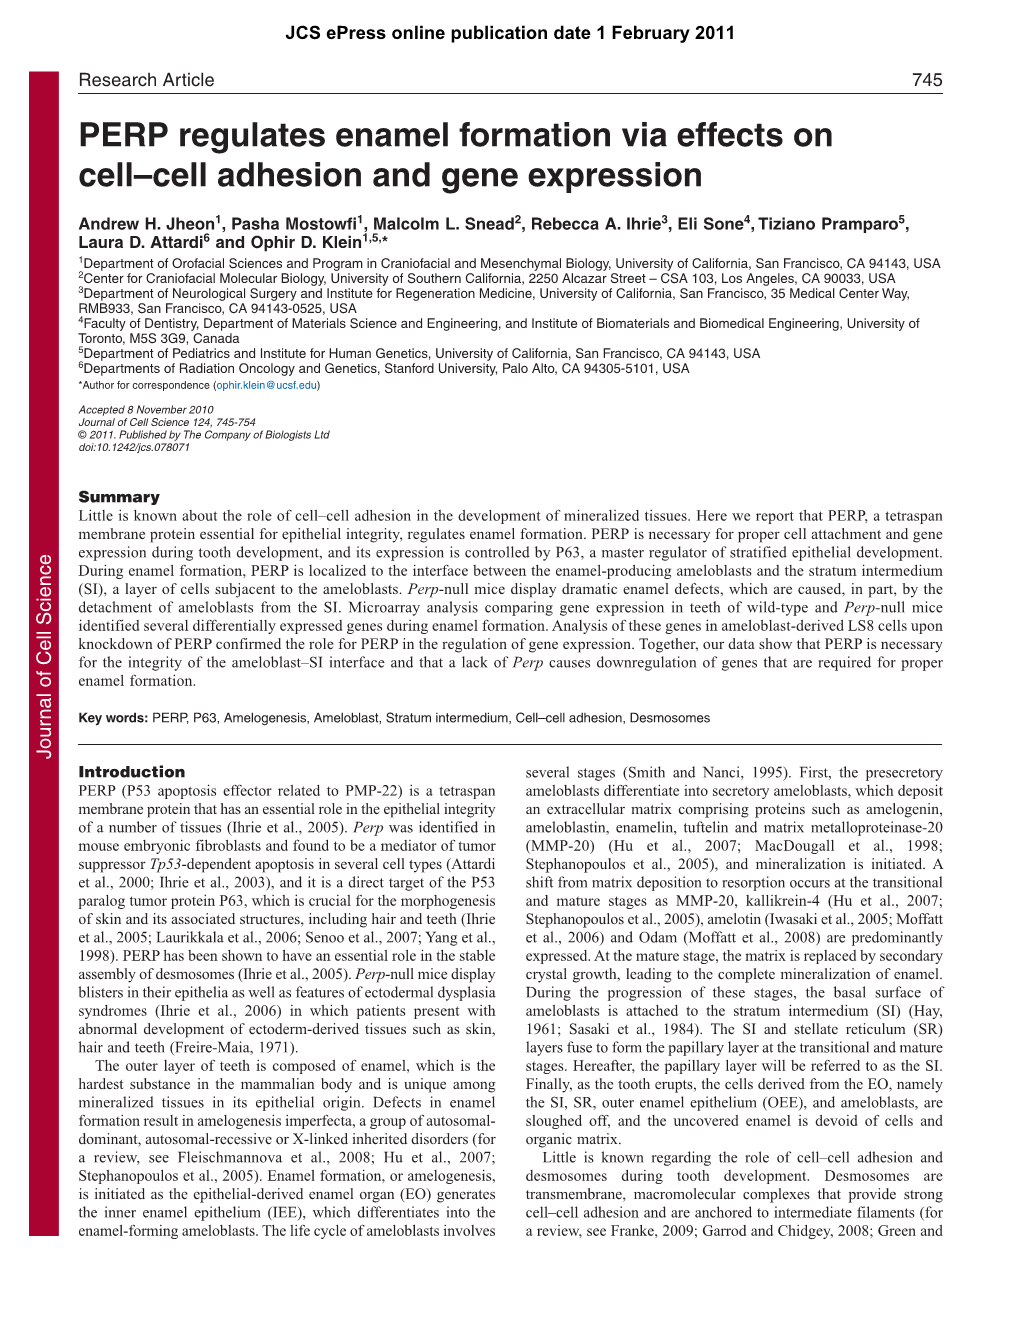 PERP Regulates Enamel Formation Via Effects on Cell–Cell Adhesion and Gene Expression